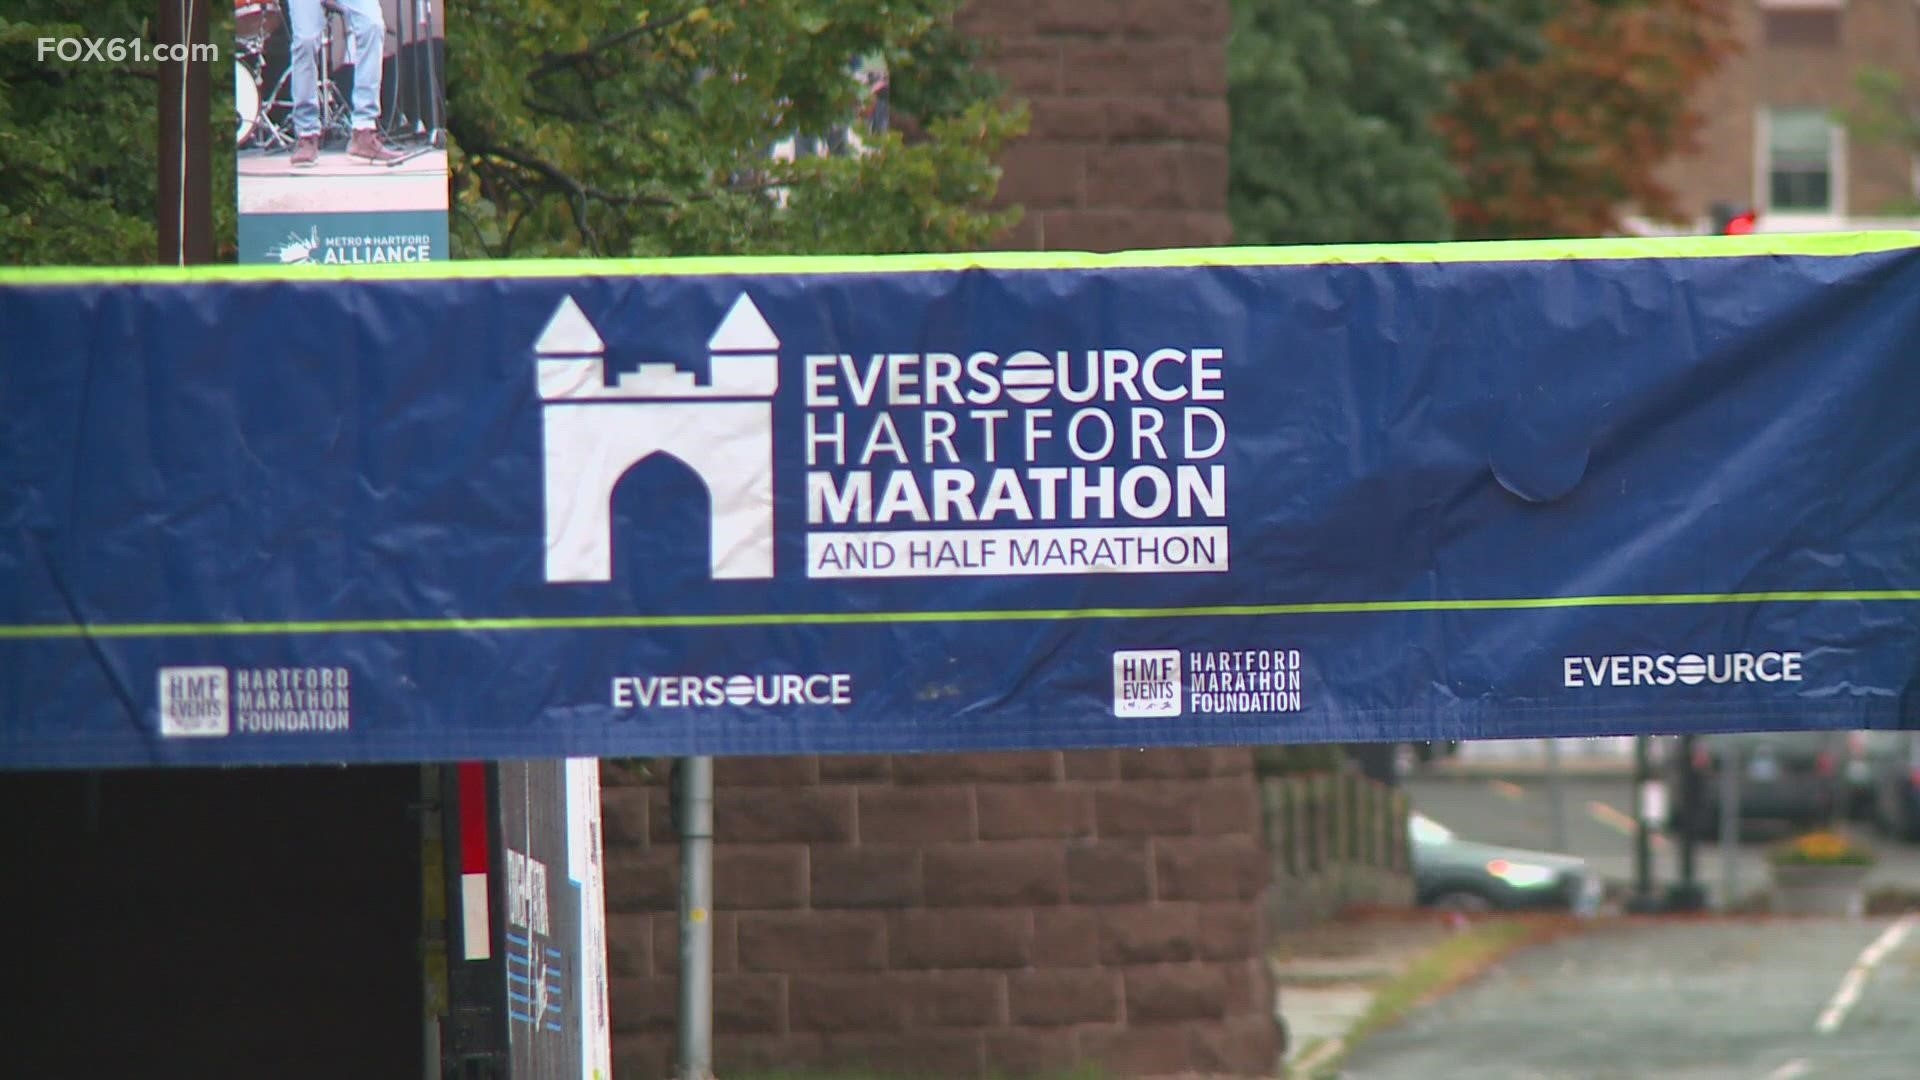 The Hartford Marathon is taking place this Saturday and travelers should expect some road closures and delays.